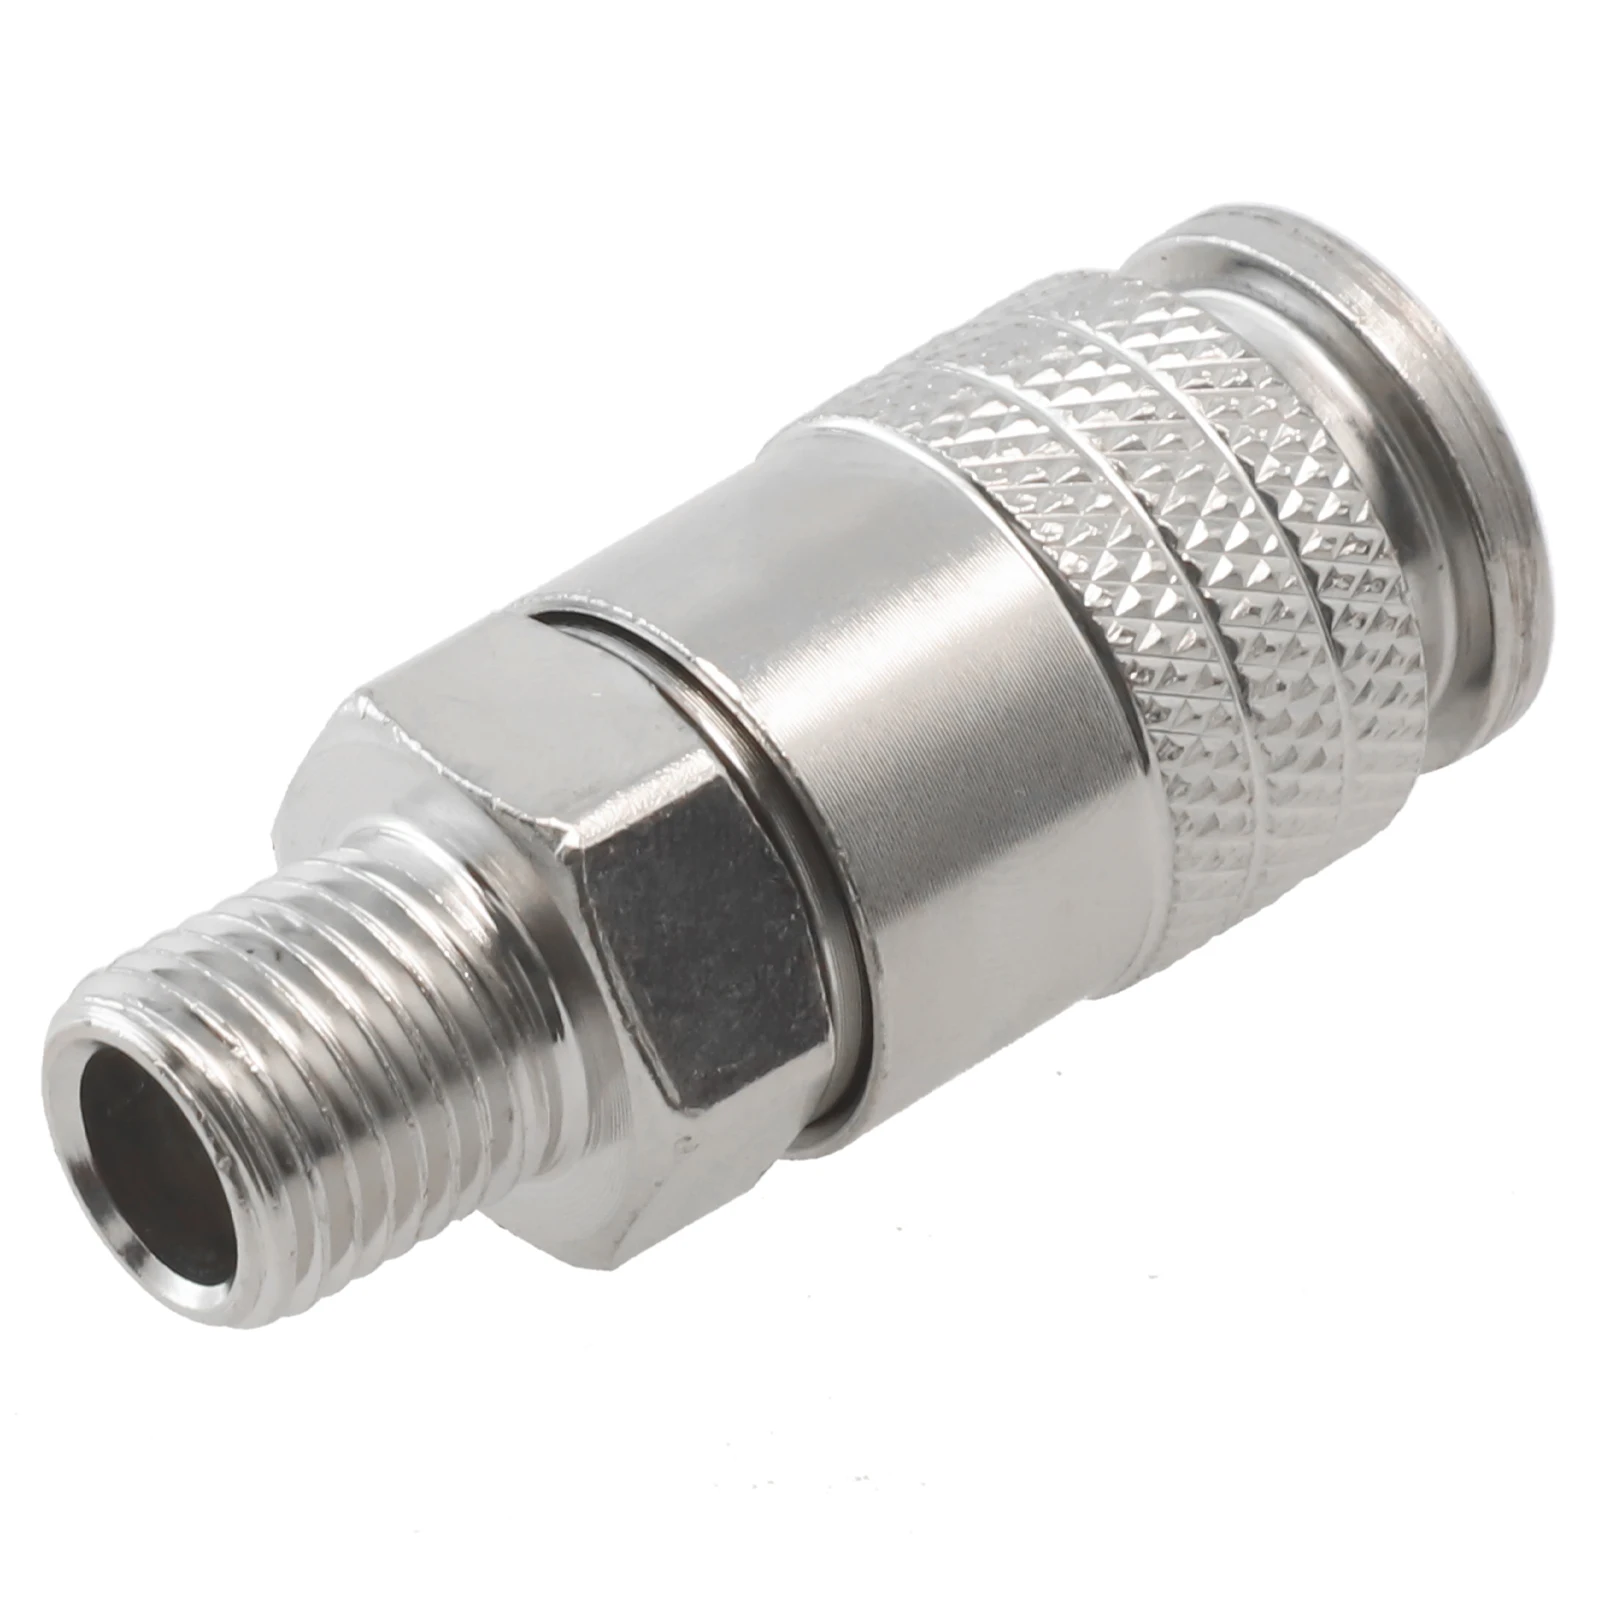 Pneumatic Fitting G1/4 Male Thread EU Standard Quick Connector For Air Compressor 53mm Length Air Compressor Tool Parts junsunmay firewire ieee 1394 6 pin male to usb 2 0 male adaptor convertor cable cord length 1 8m